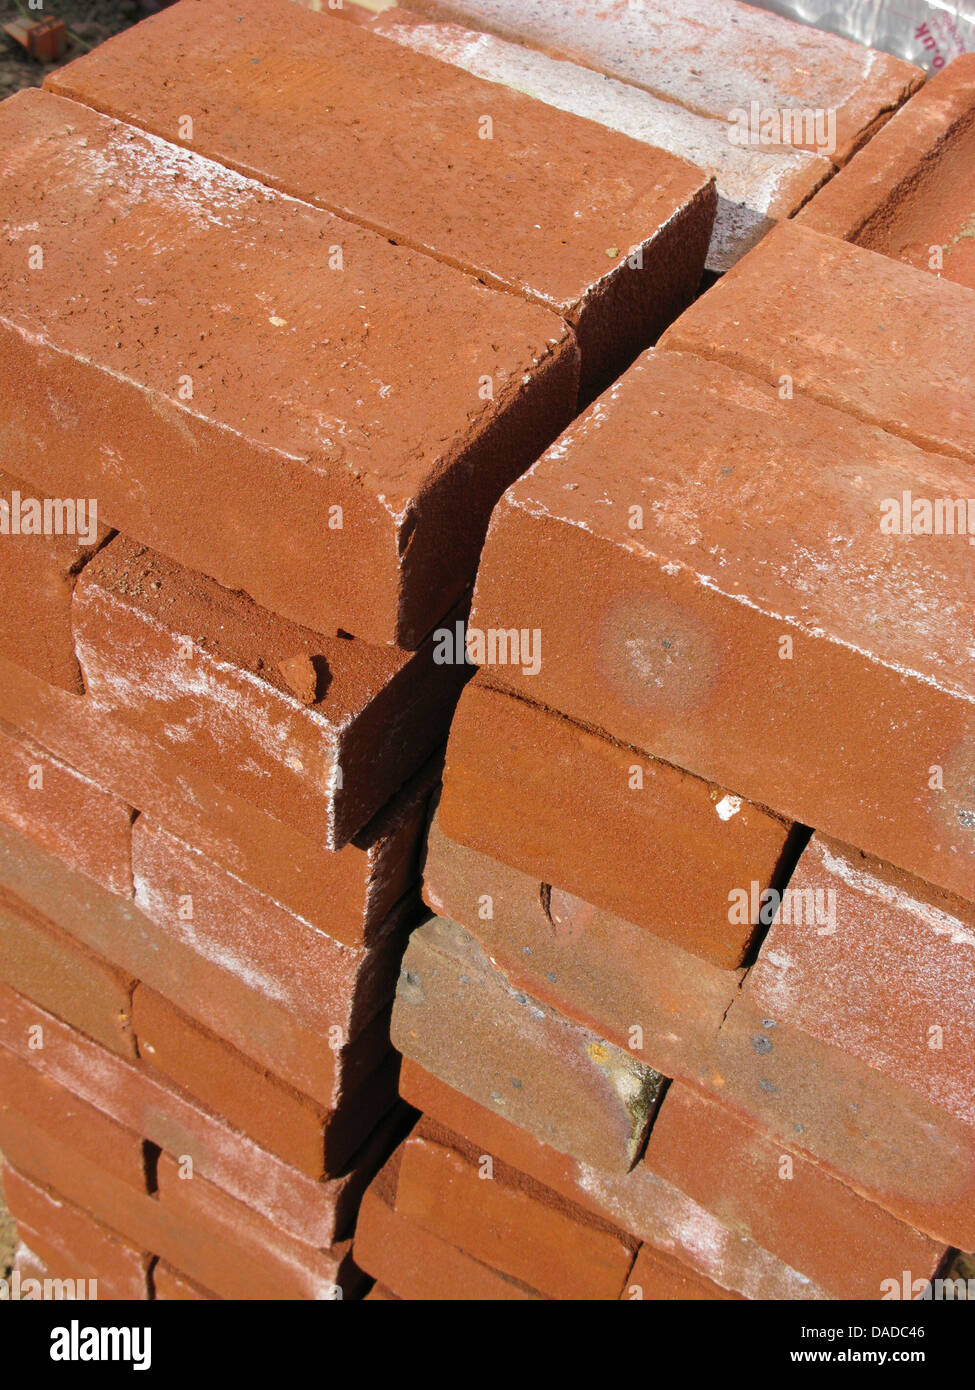 Piles of bricks for the construction industry Stock Photo